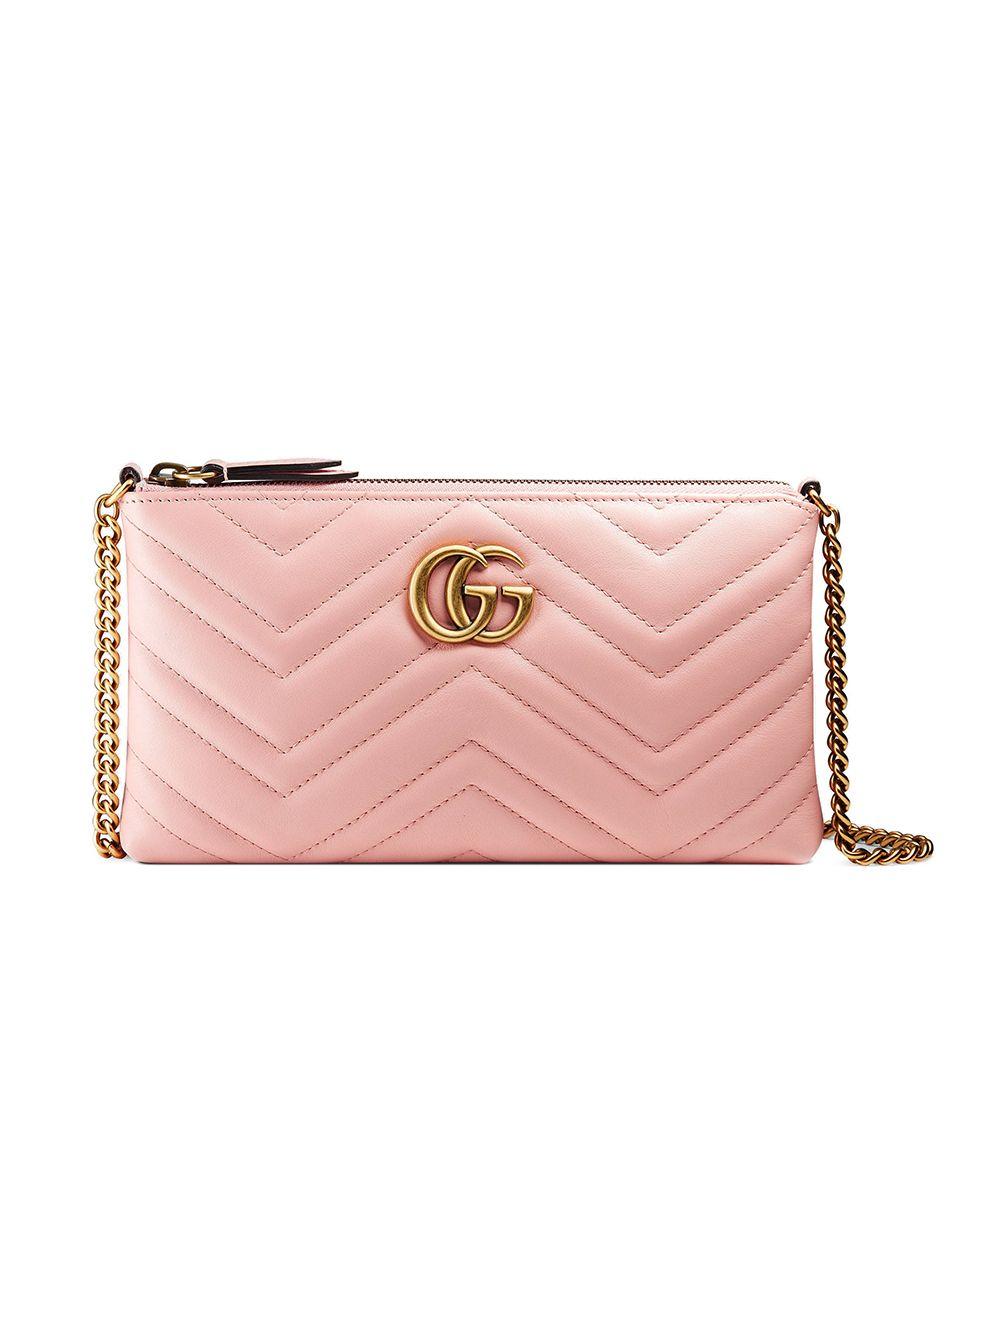 Gucci Leather GG Marmont Mini Chain Bag in Pink - Lyst